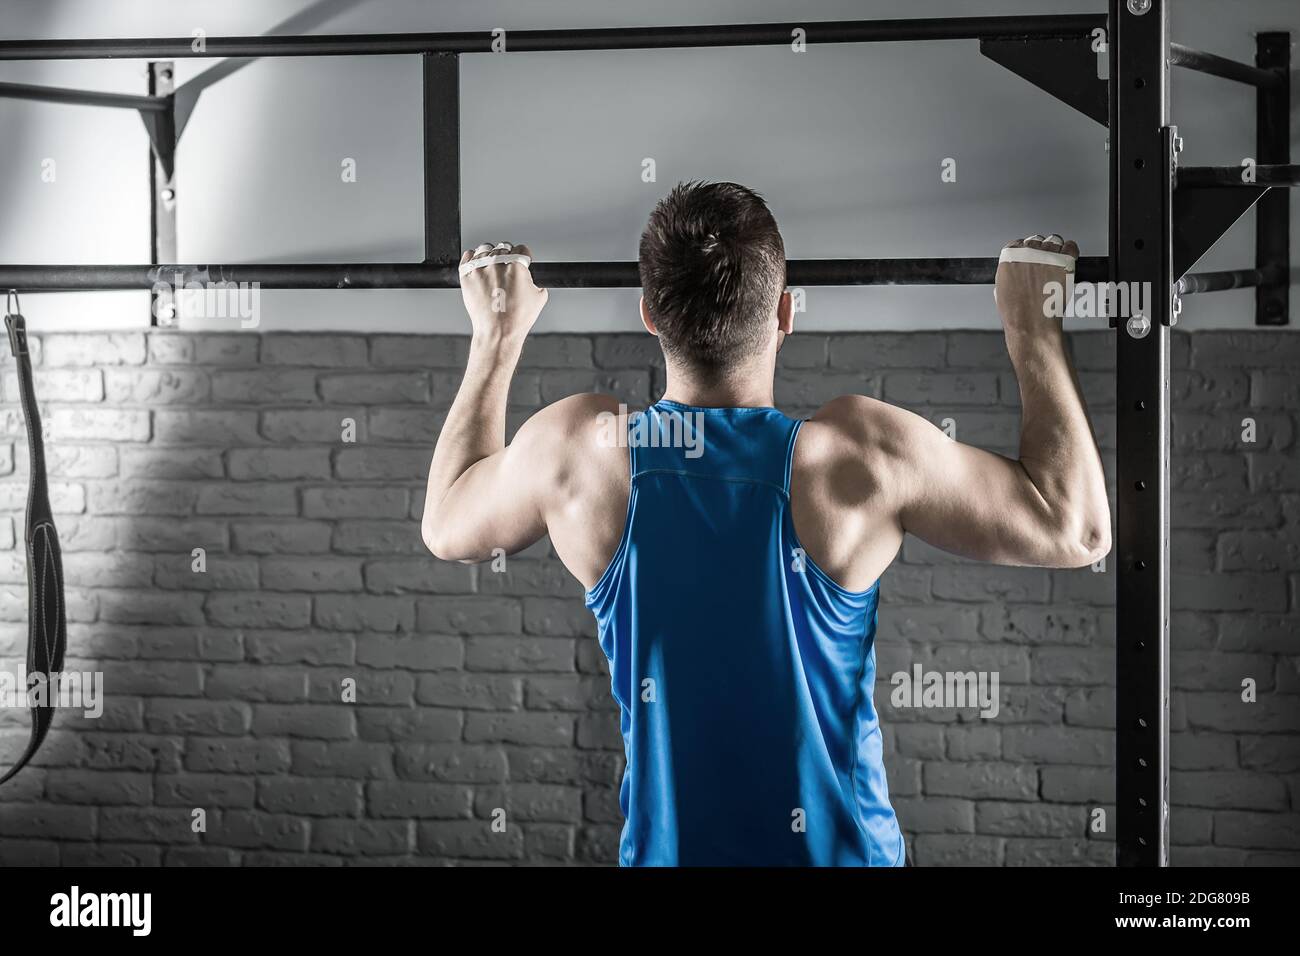 Pull-up workout Stock Photo